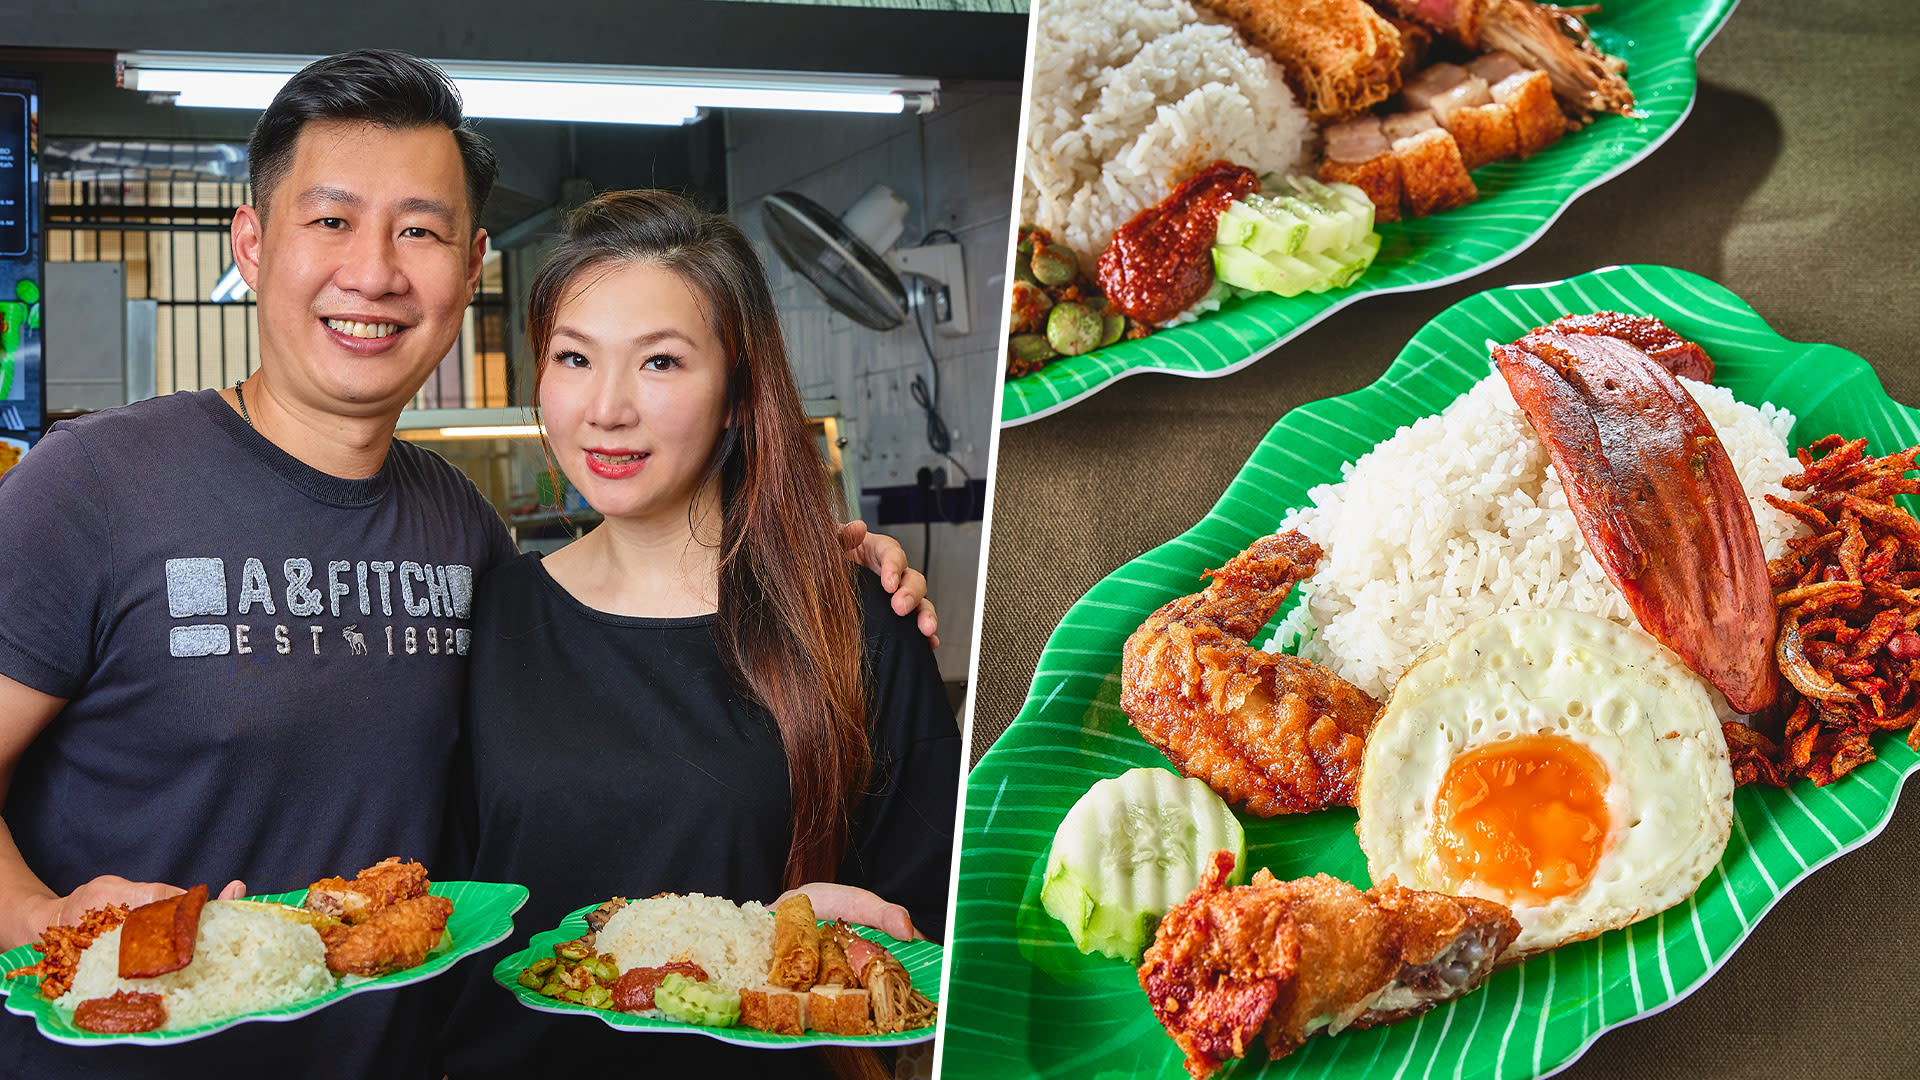 Sales Director Who Used To Earn “Six Figures A Year” Now Sells Nasi Lemak From $3.80